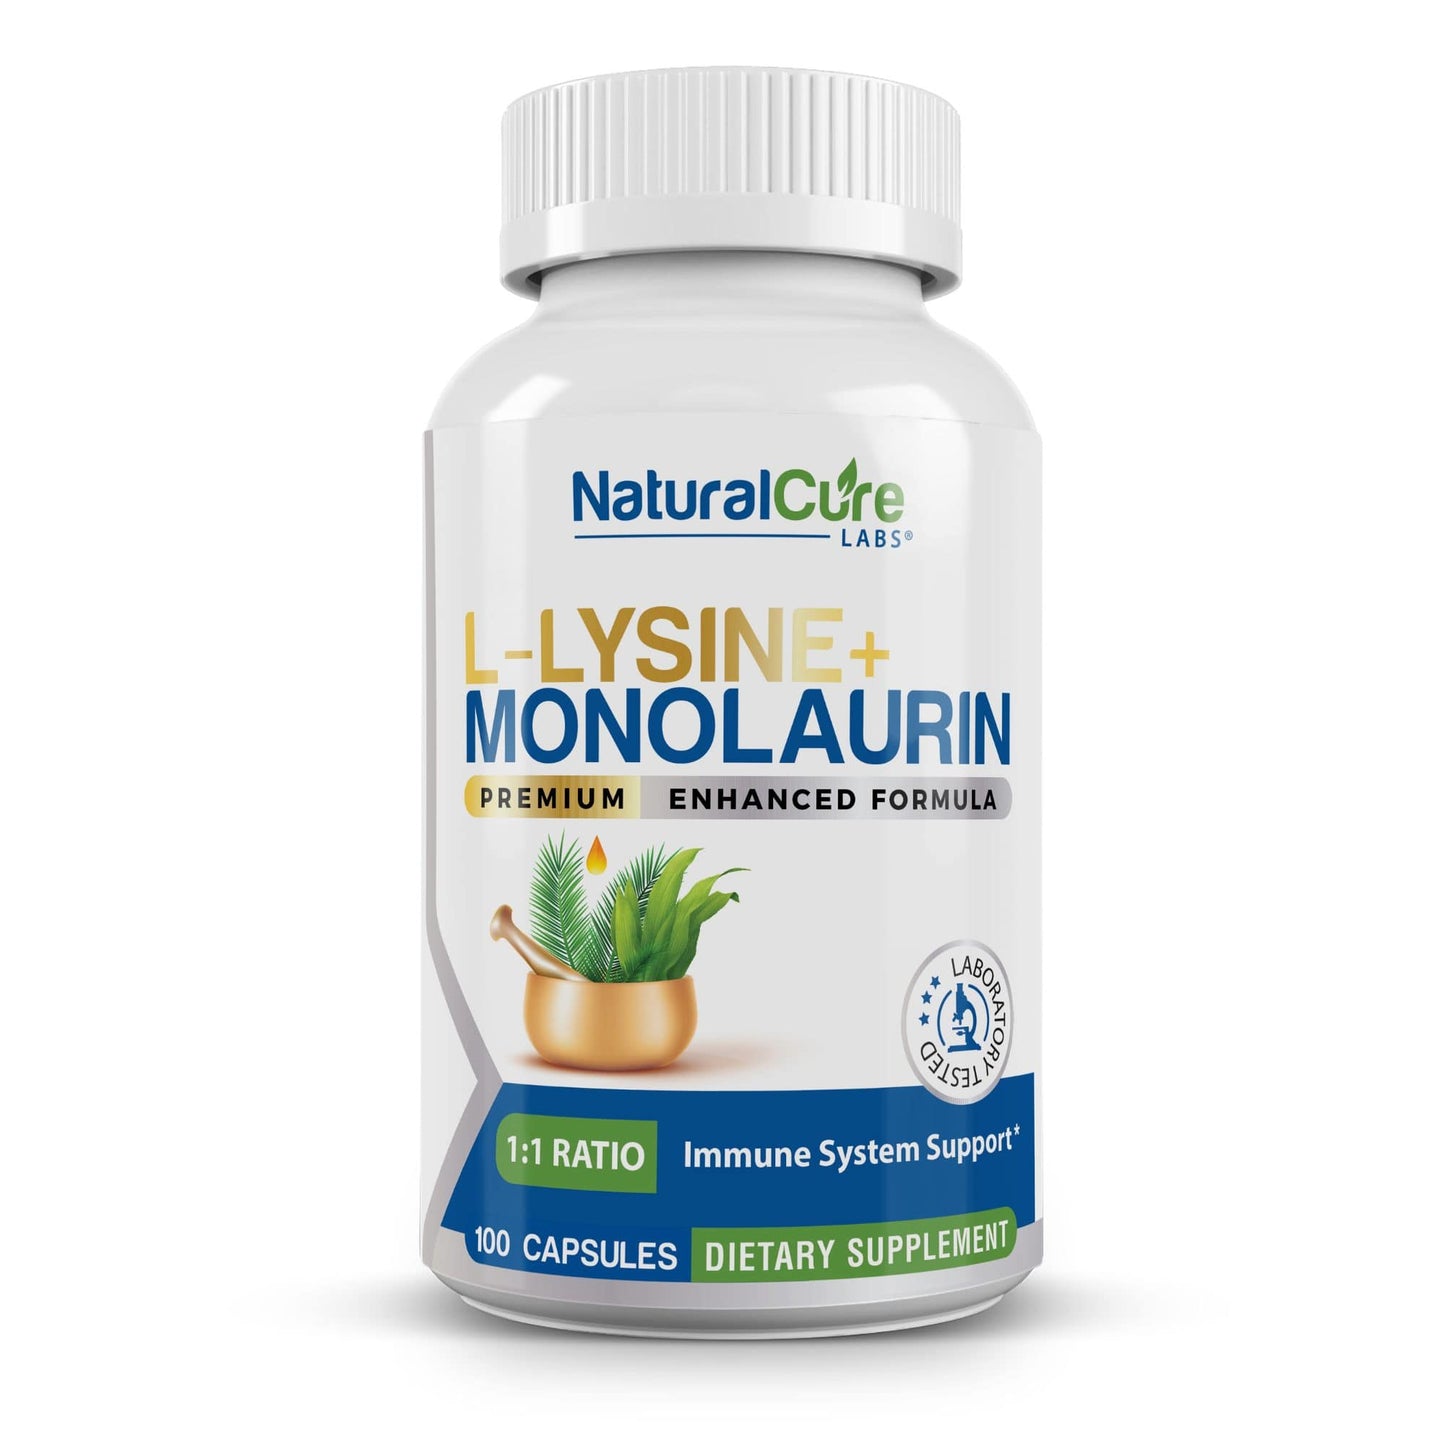 A bottle of Natural Cure Labs L-Lysine + Monolaurin dietary supplement, indicating a 1:1 ratio blend for immune system support, with 100 capsules per bottle.